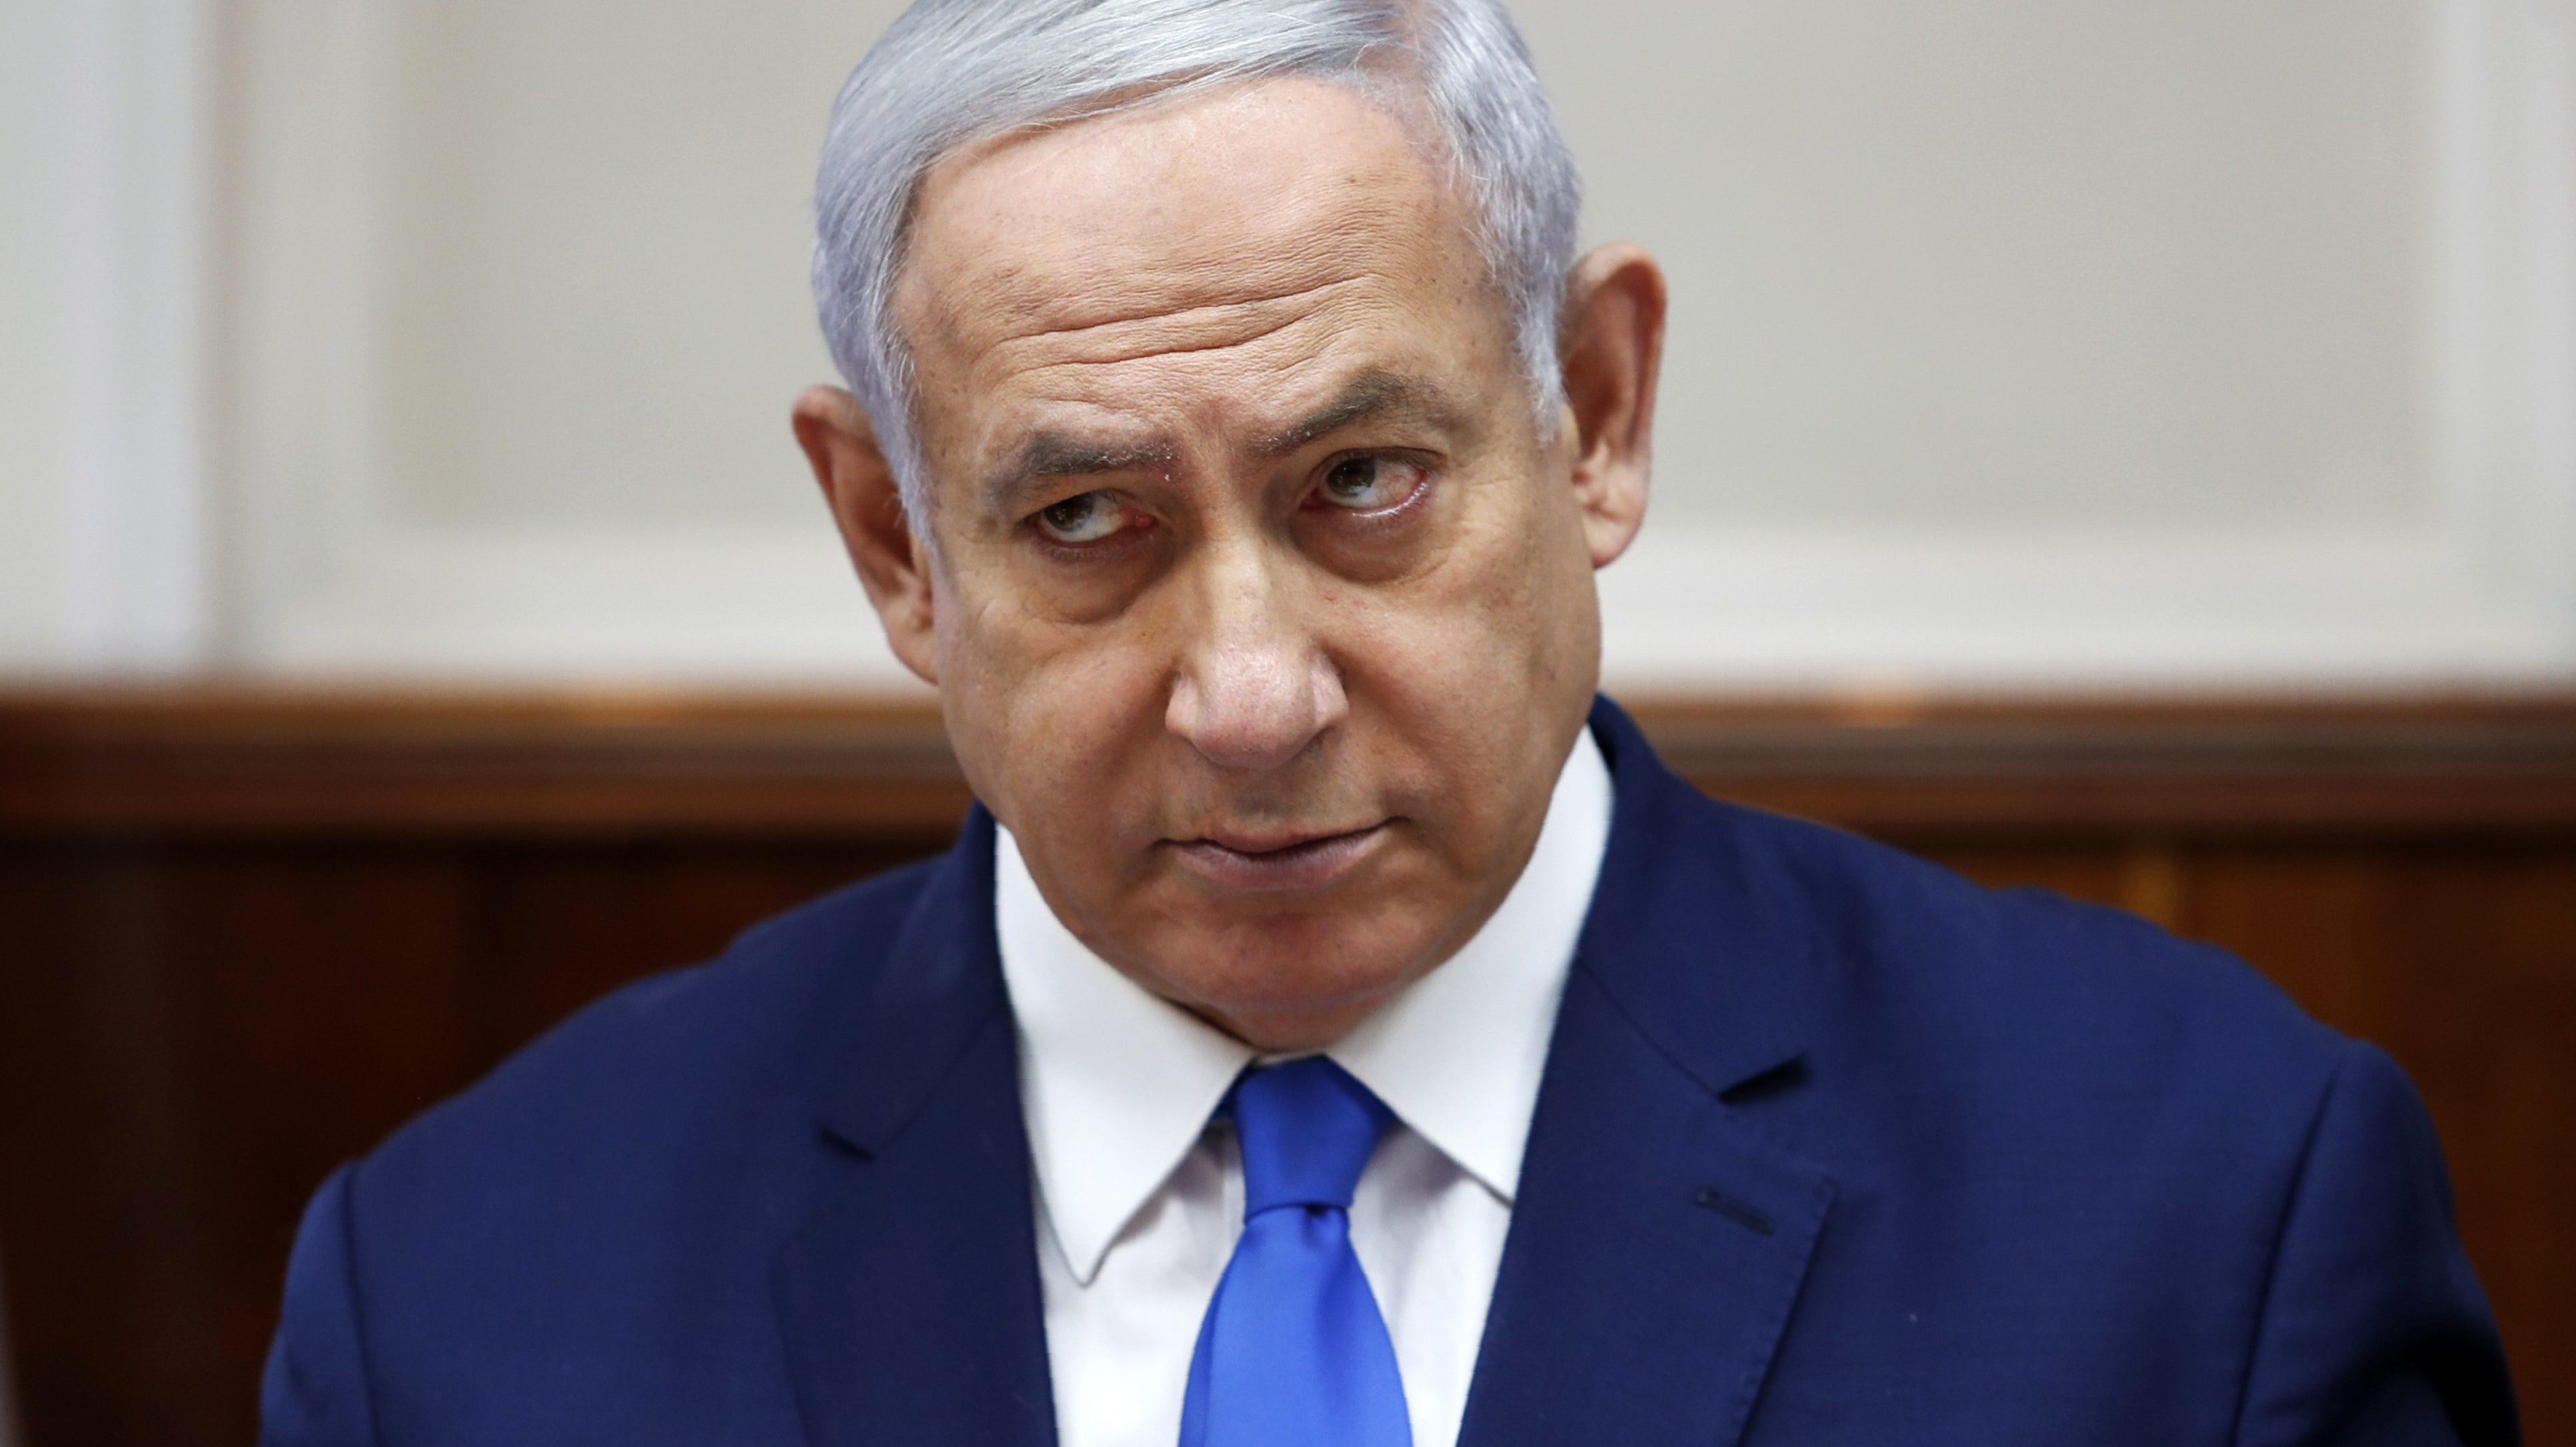 Netanyahu: IDF ‘Only Army in World to Fight Iran’